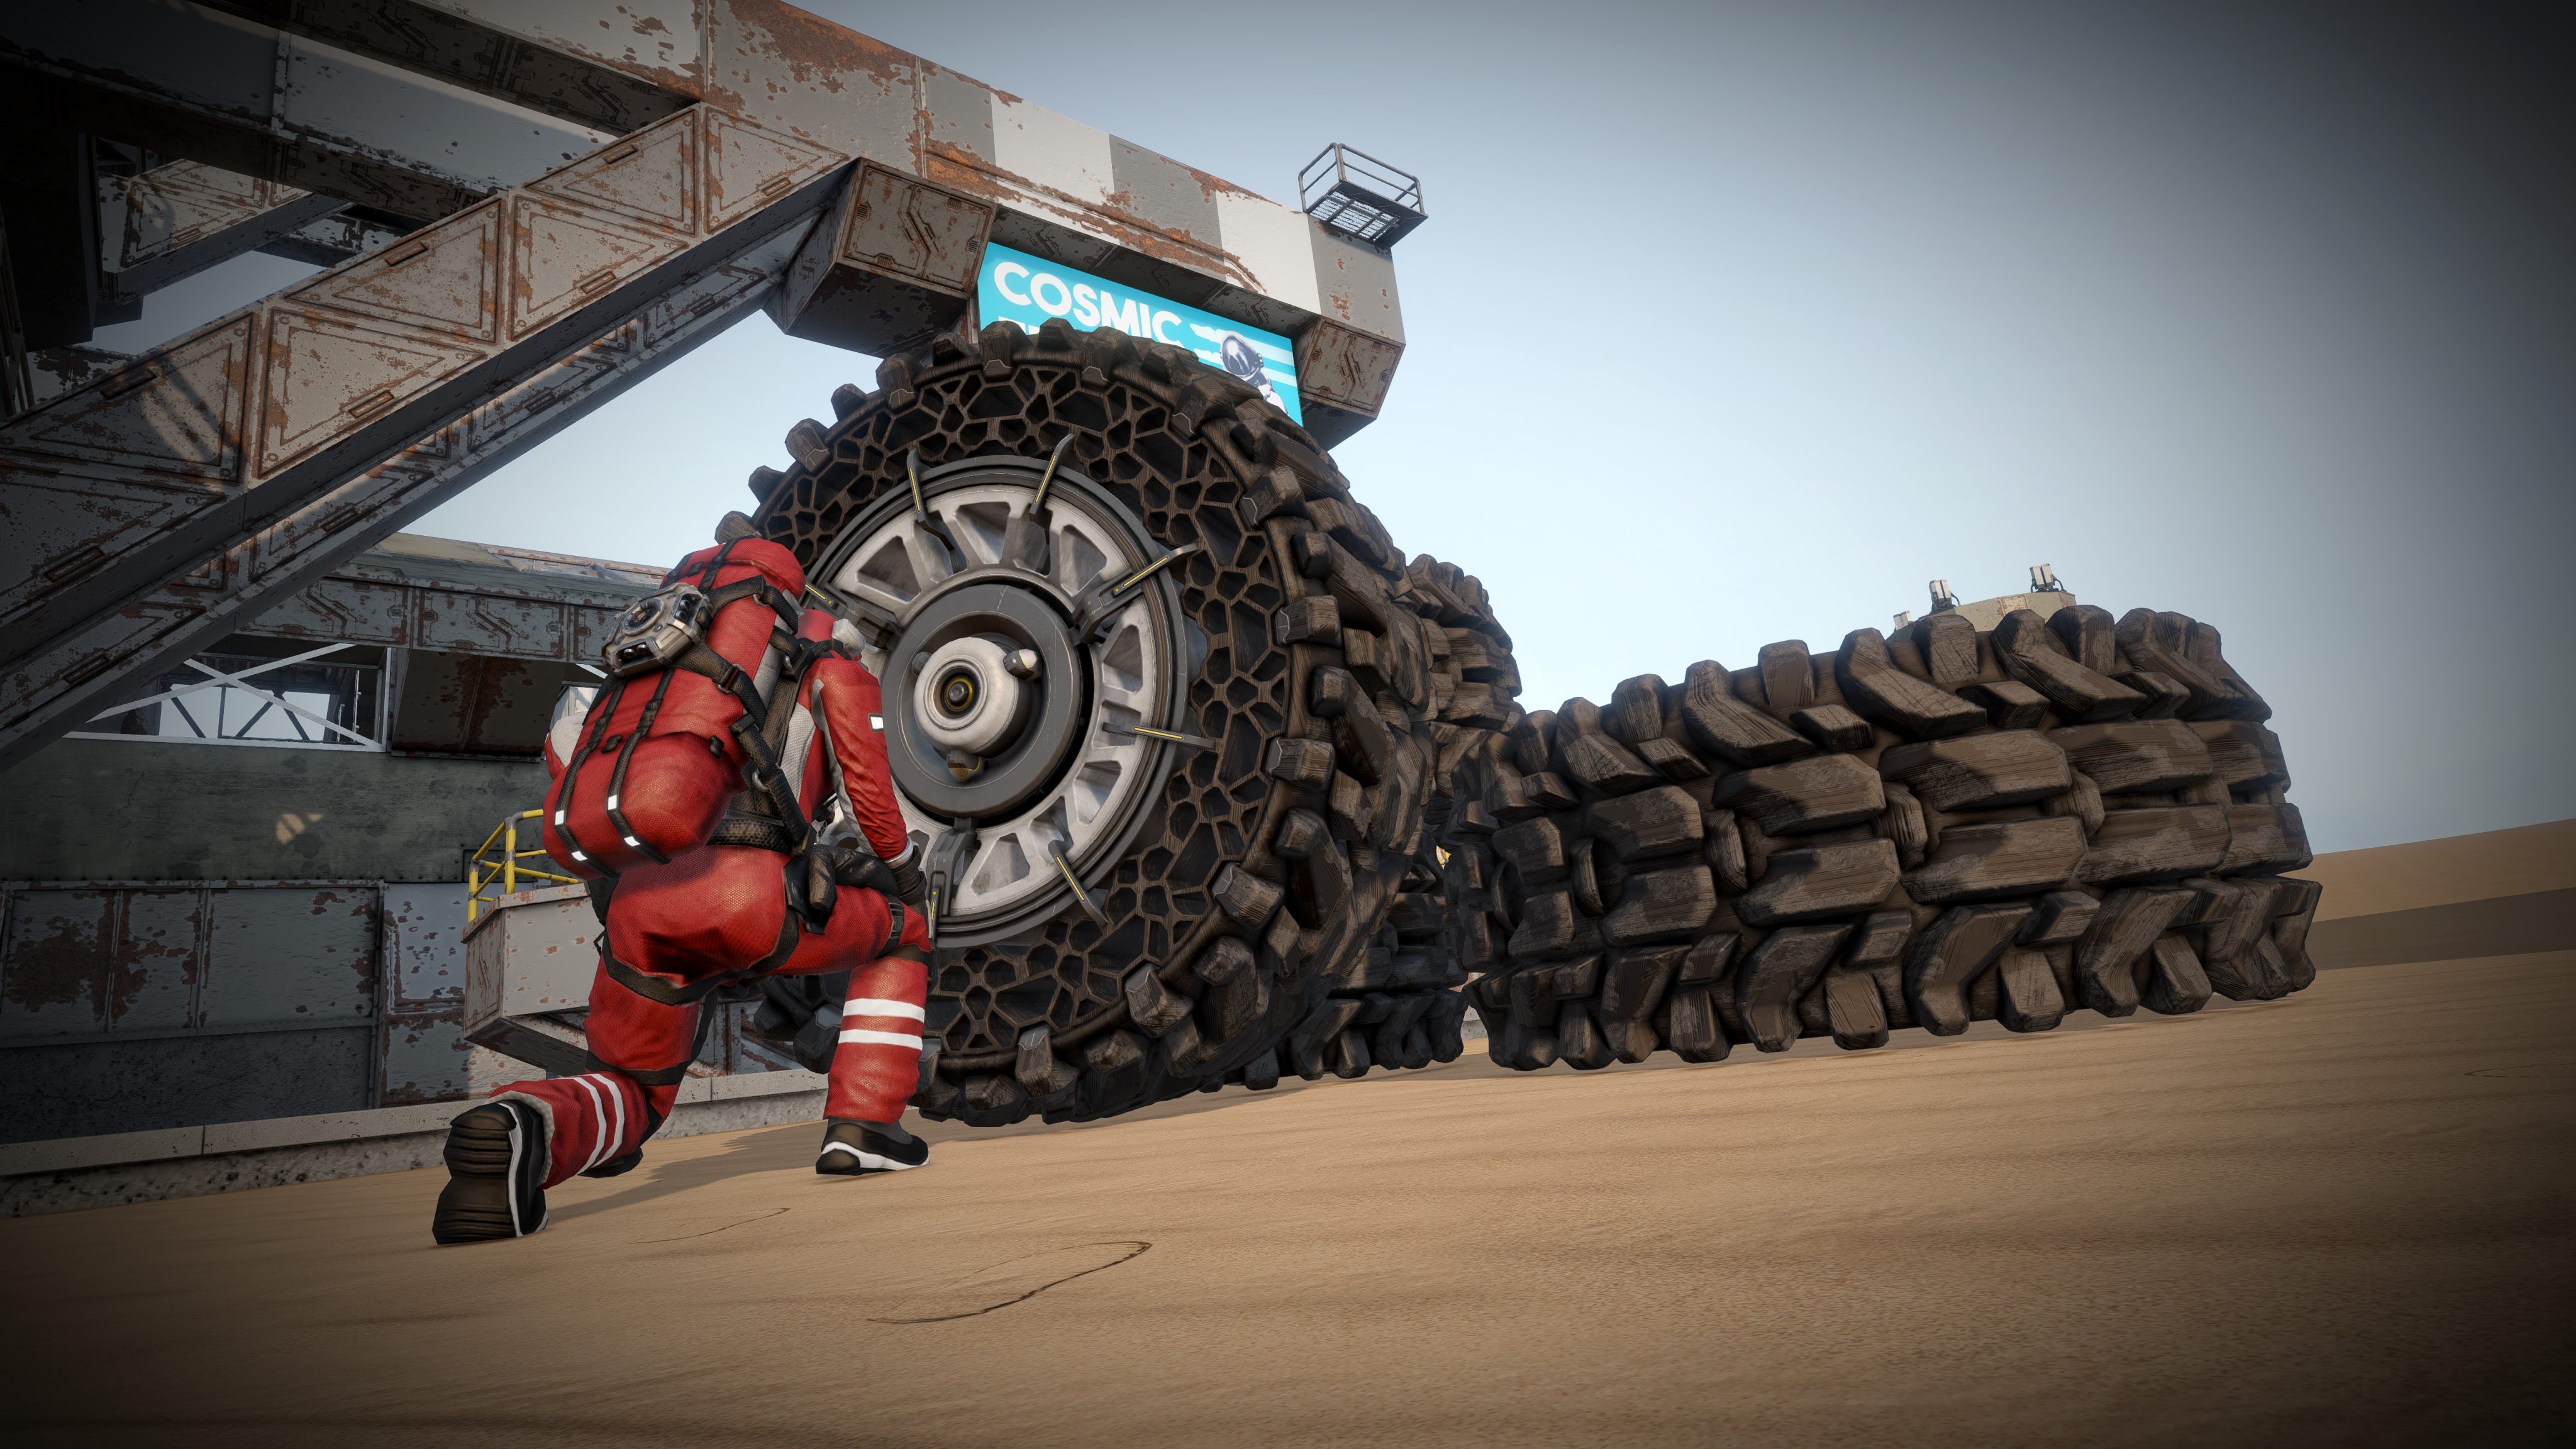 HD desktop wallpaper featuring a space engineer character next to large wheels on a futuristic construction site, ideal for fans of space engineering games and themes.